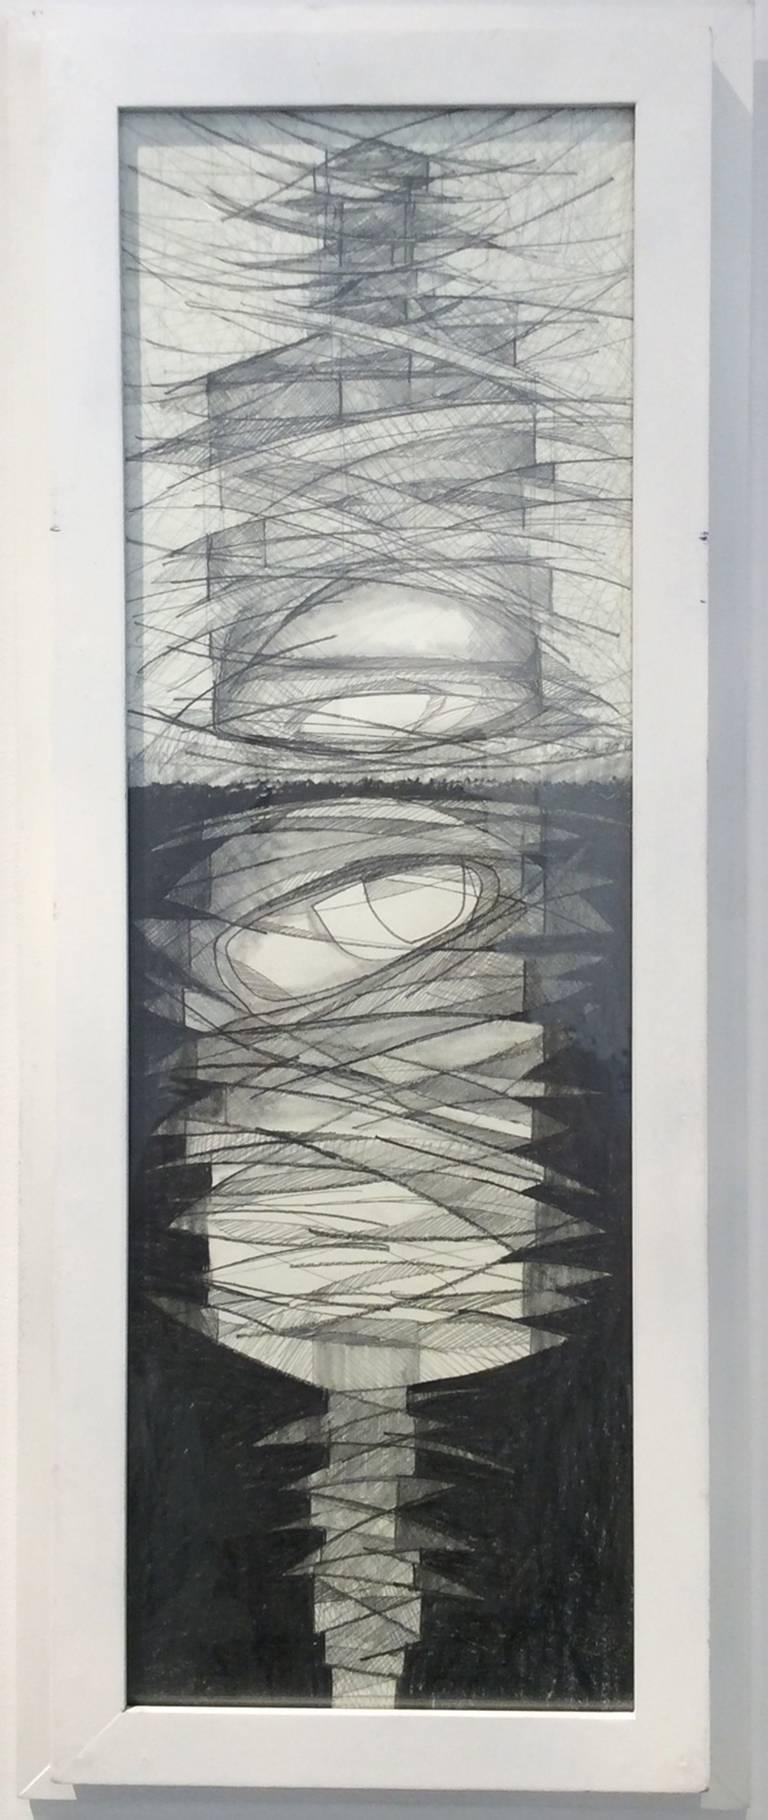 David Dew Bruner Abstract Drawing - Morandi Origami C (Vertical Graphite Drawing in Mid-Century Modern Style)